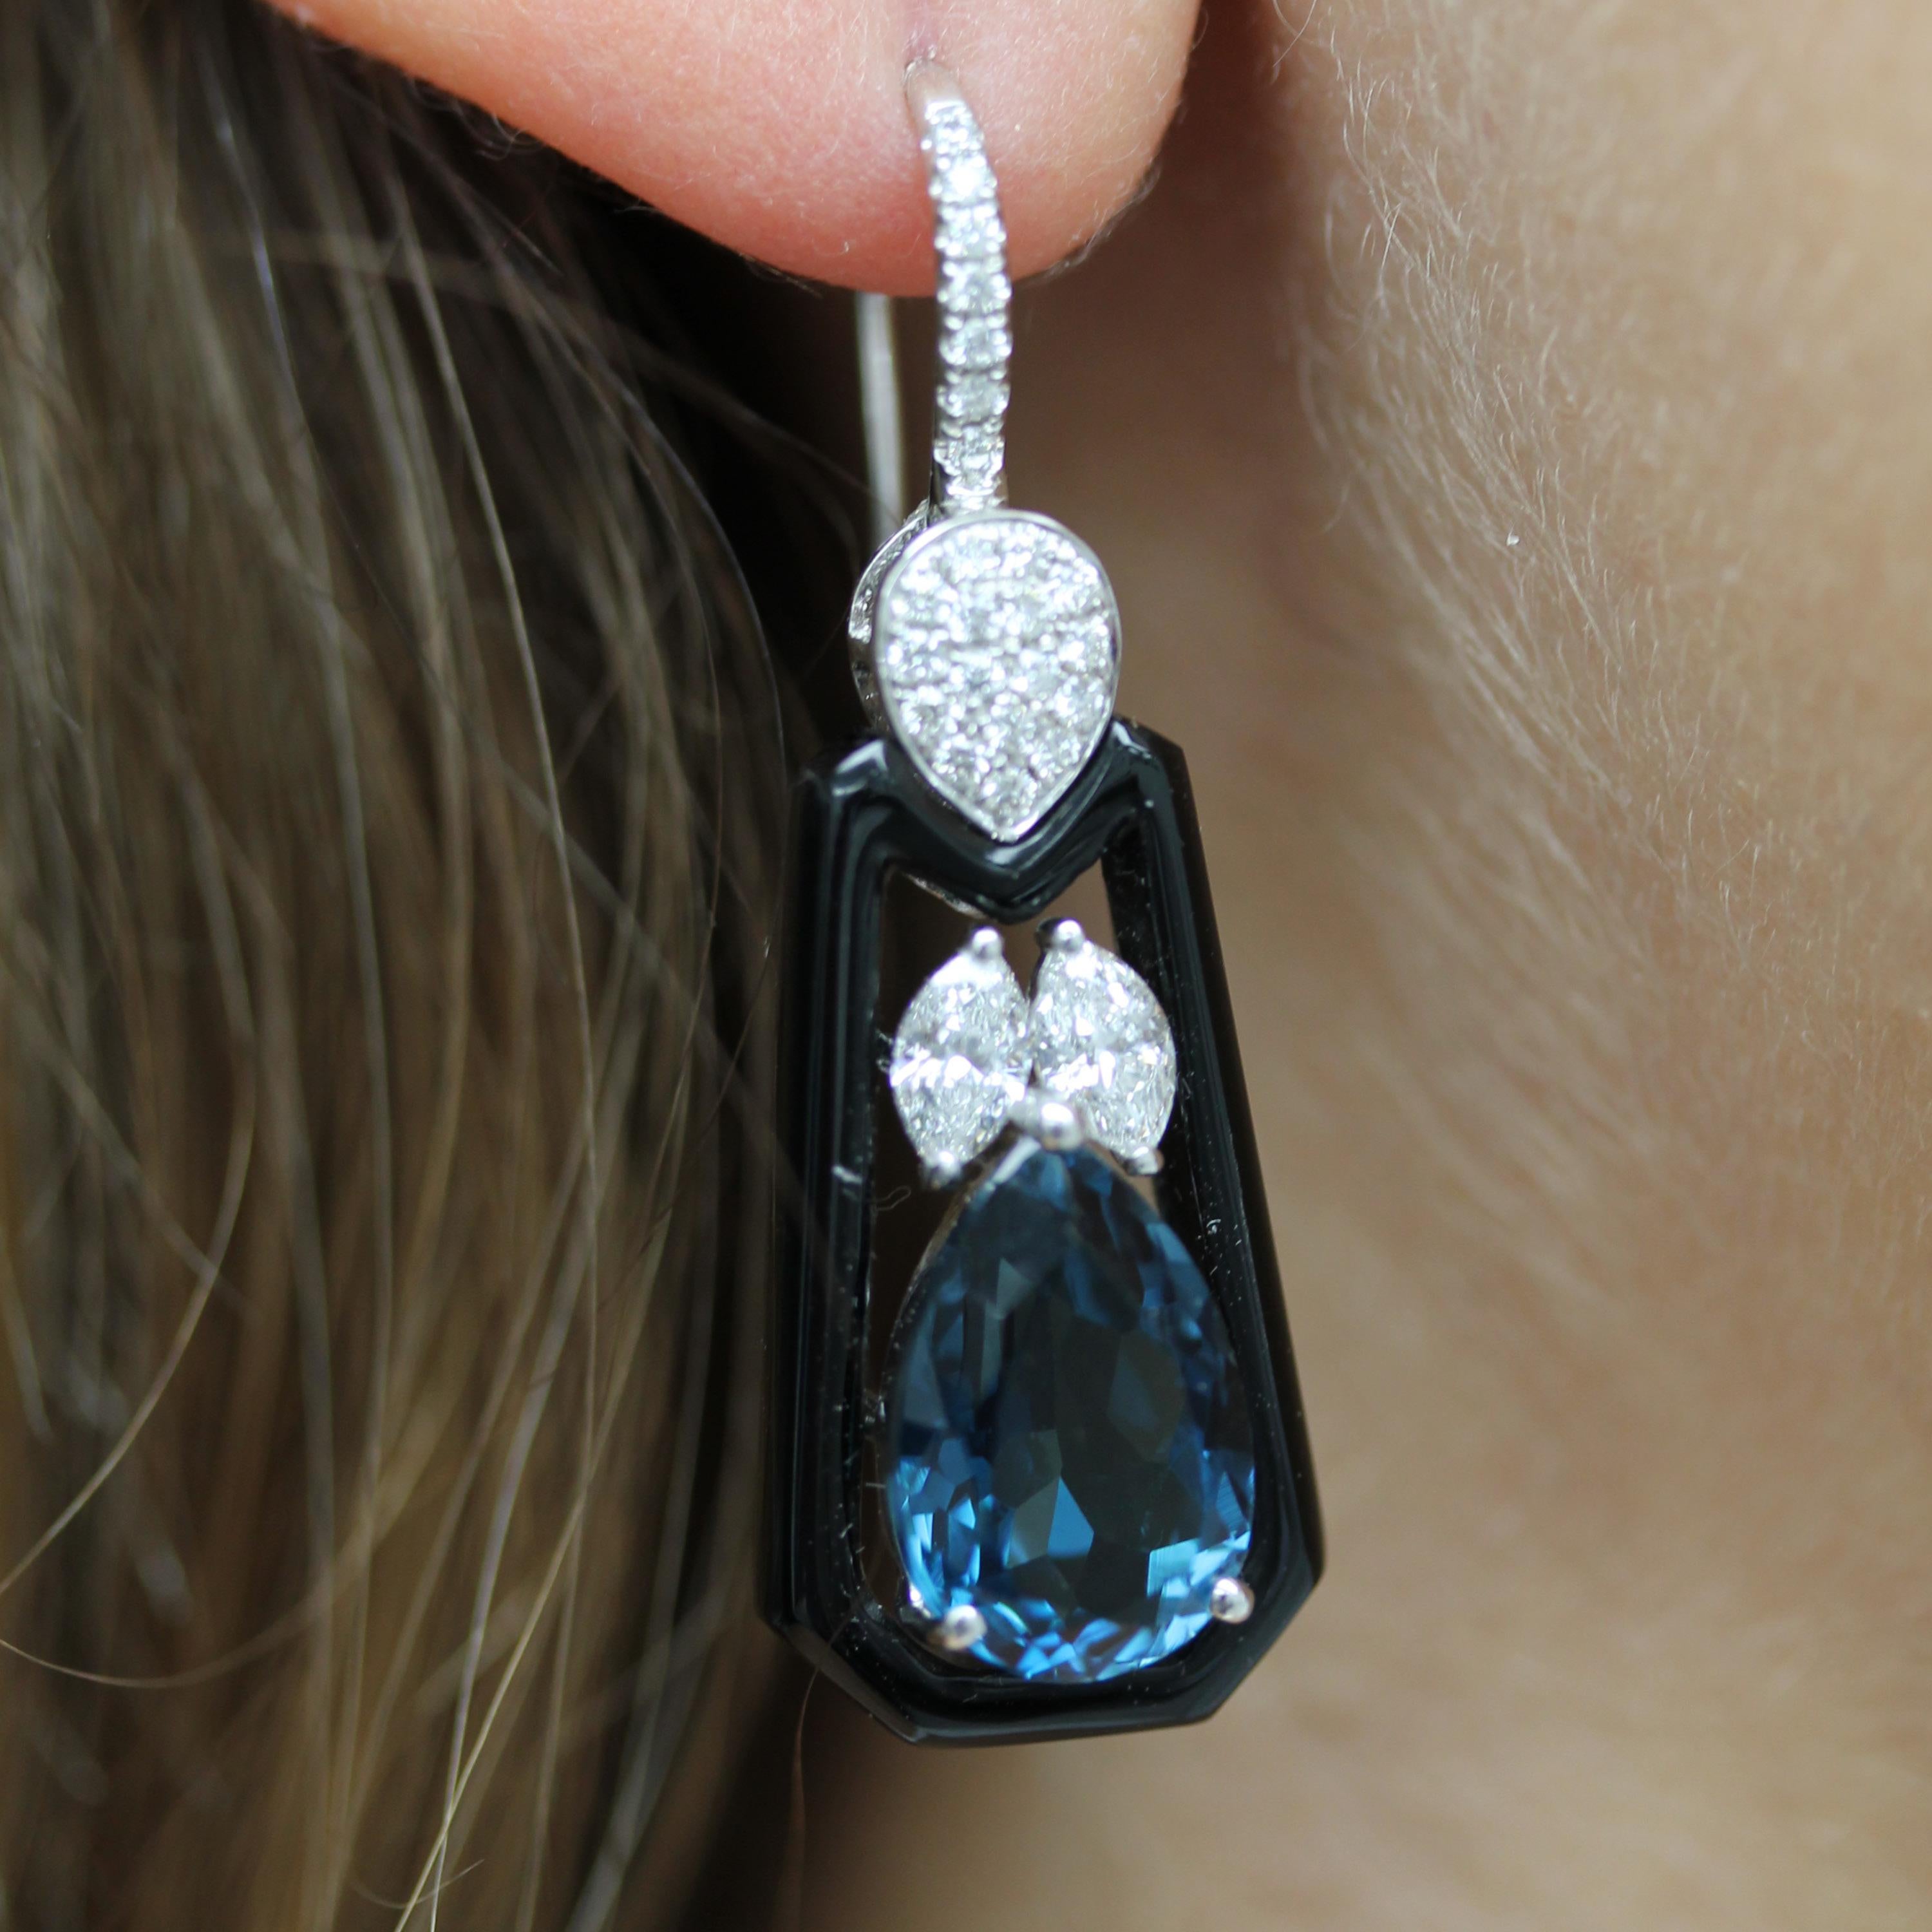 Art-Deco Style Earrings featuring Pear-Shaped London Blue Topaz, Black Onyx, and Marquise and Round Diamonds, set in 18K white gold. French Wire Backs. London Blue Topaz stone used is natural, untreated, and a deep indigo blue. The December